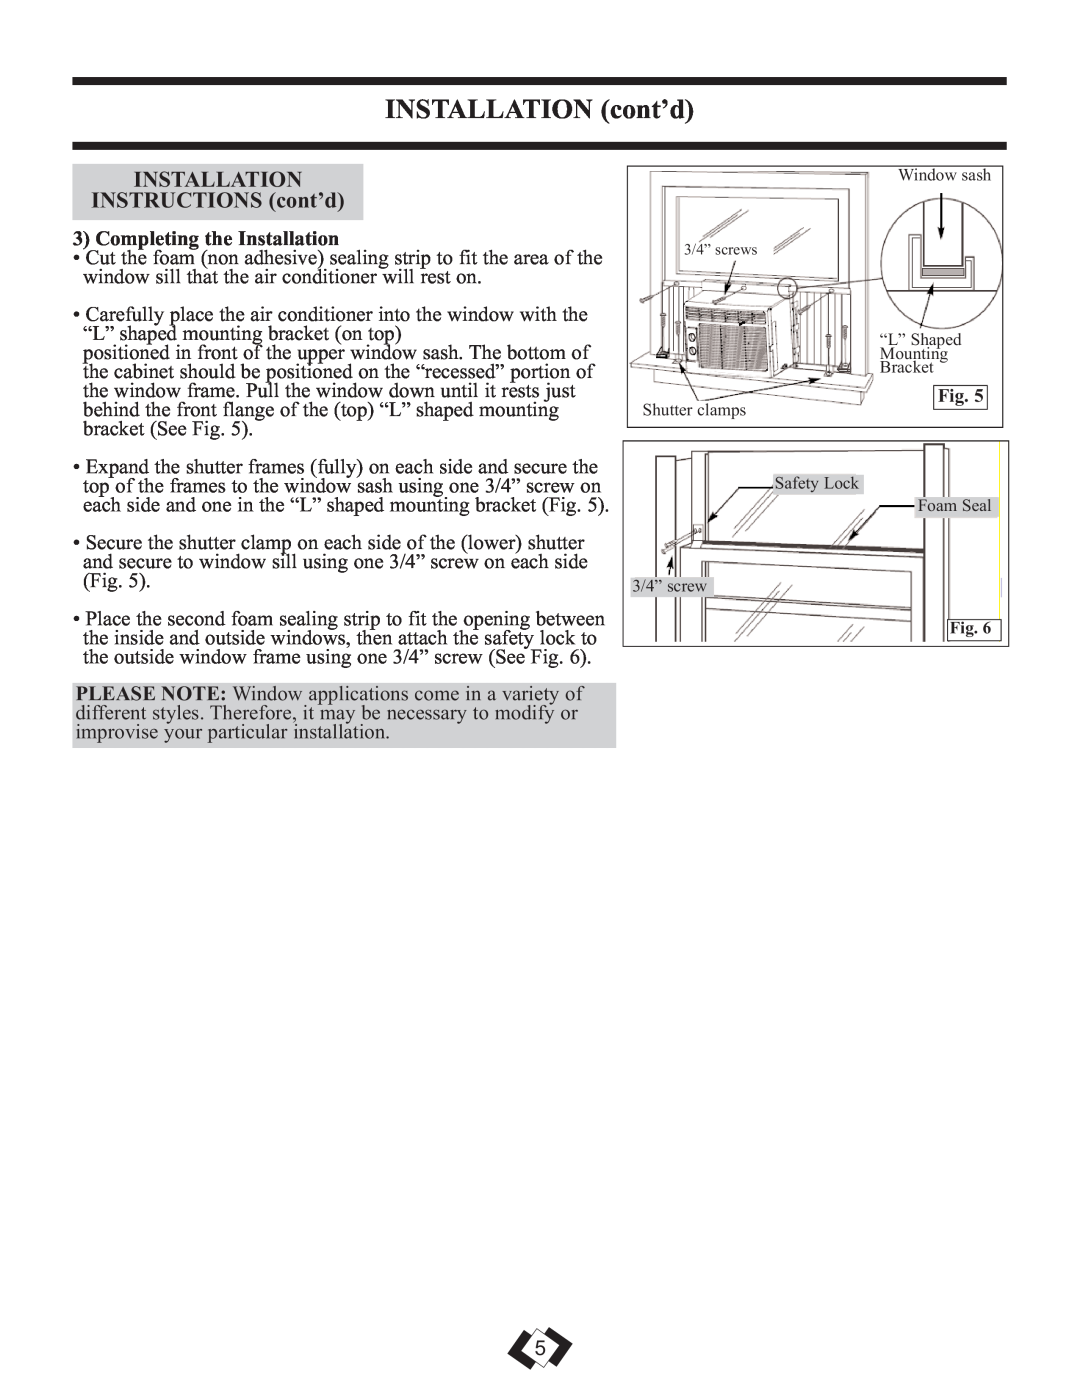 Danby DAC6010E warranty INSTALLATION cont’d, INSTALLATION INSTRUCTIONS cont’d, Completing the Installation 